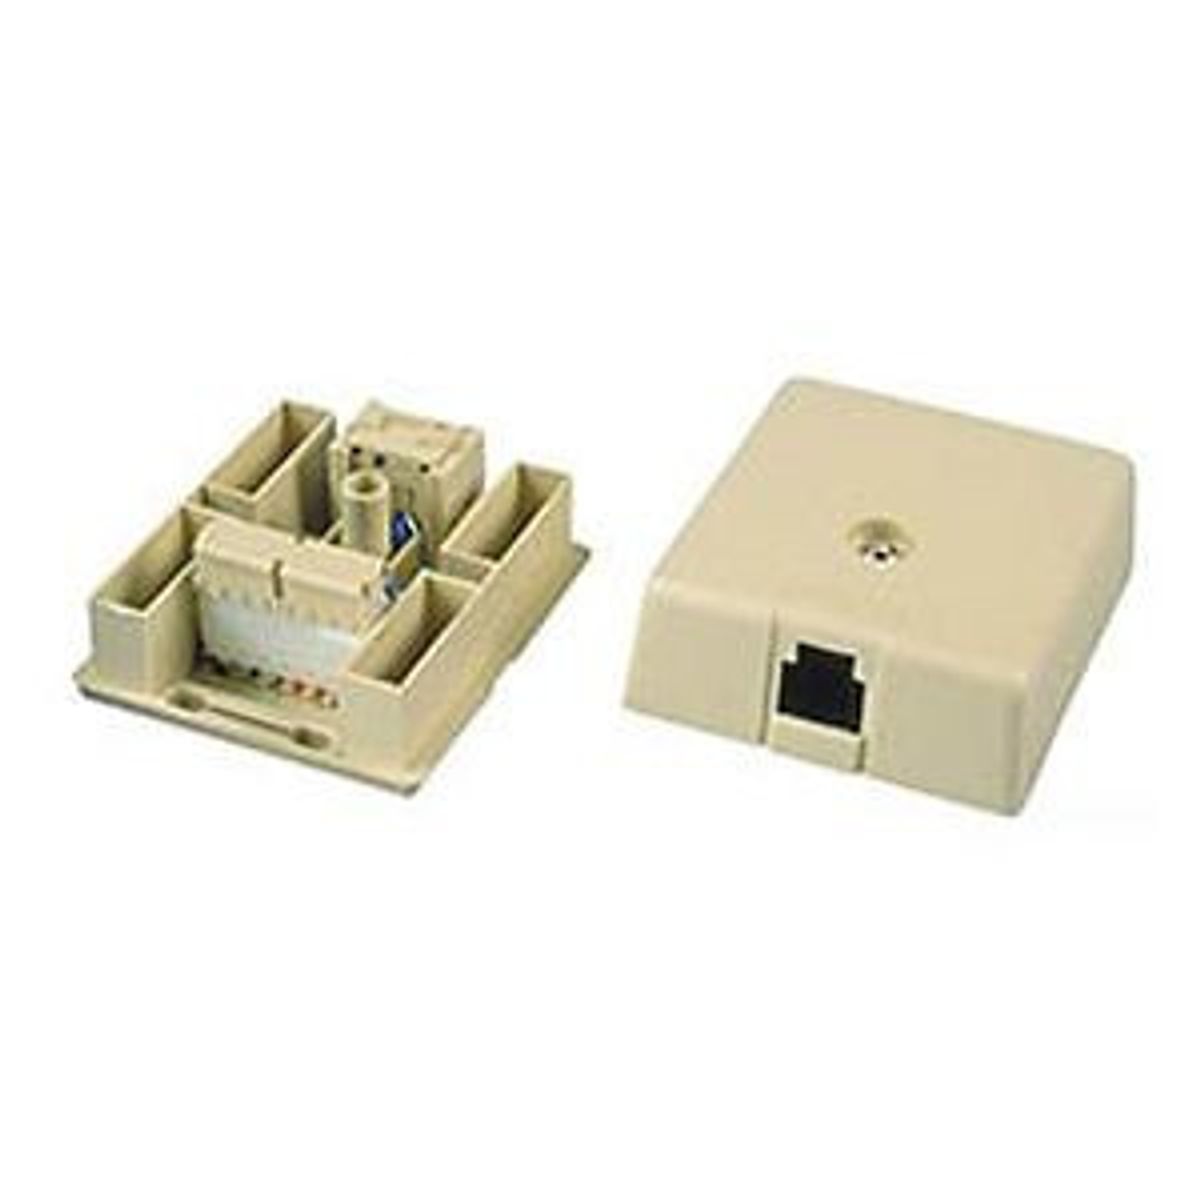 Surface Mount IDC Jack-110 Type 8-Conductor, Electrical Ivory 